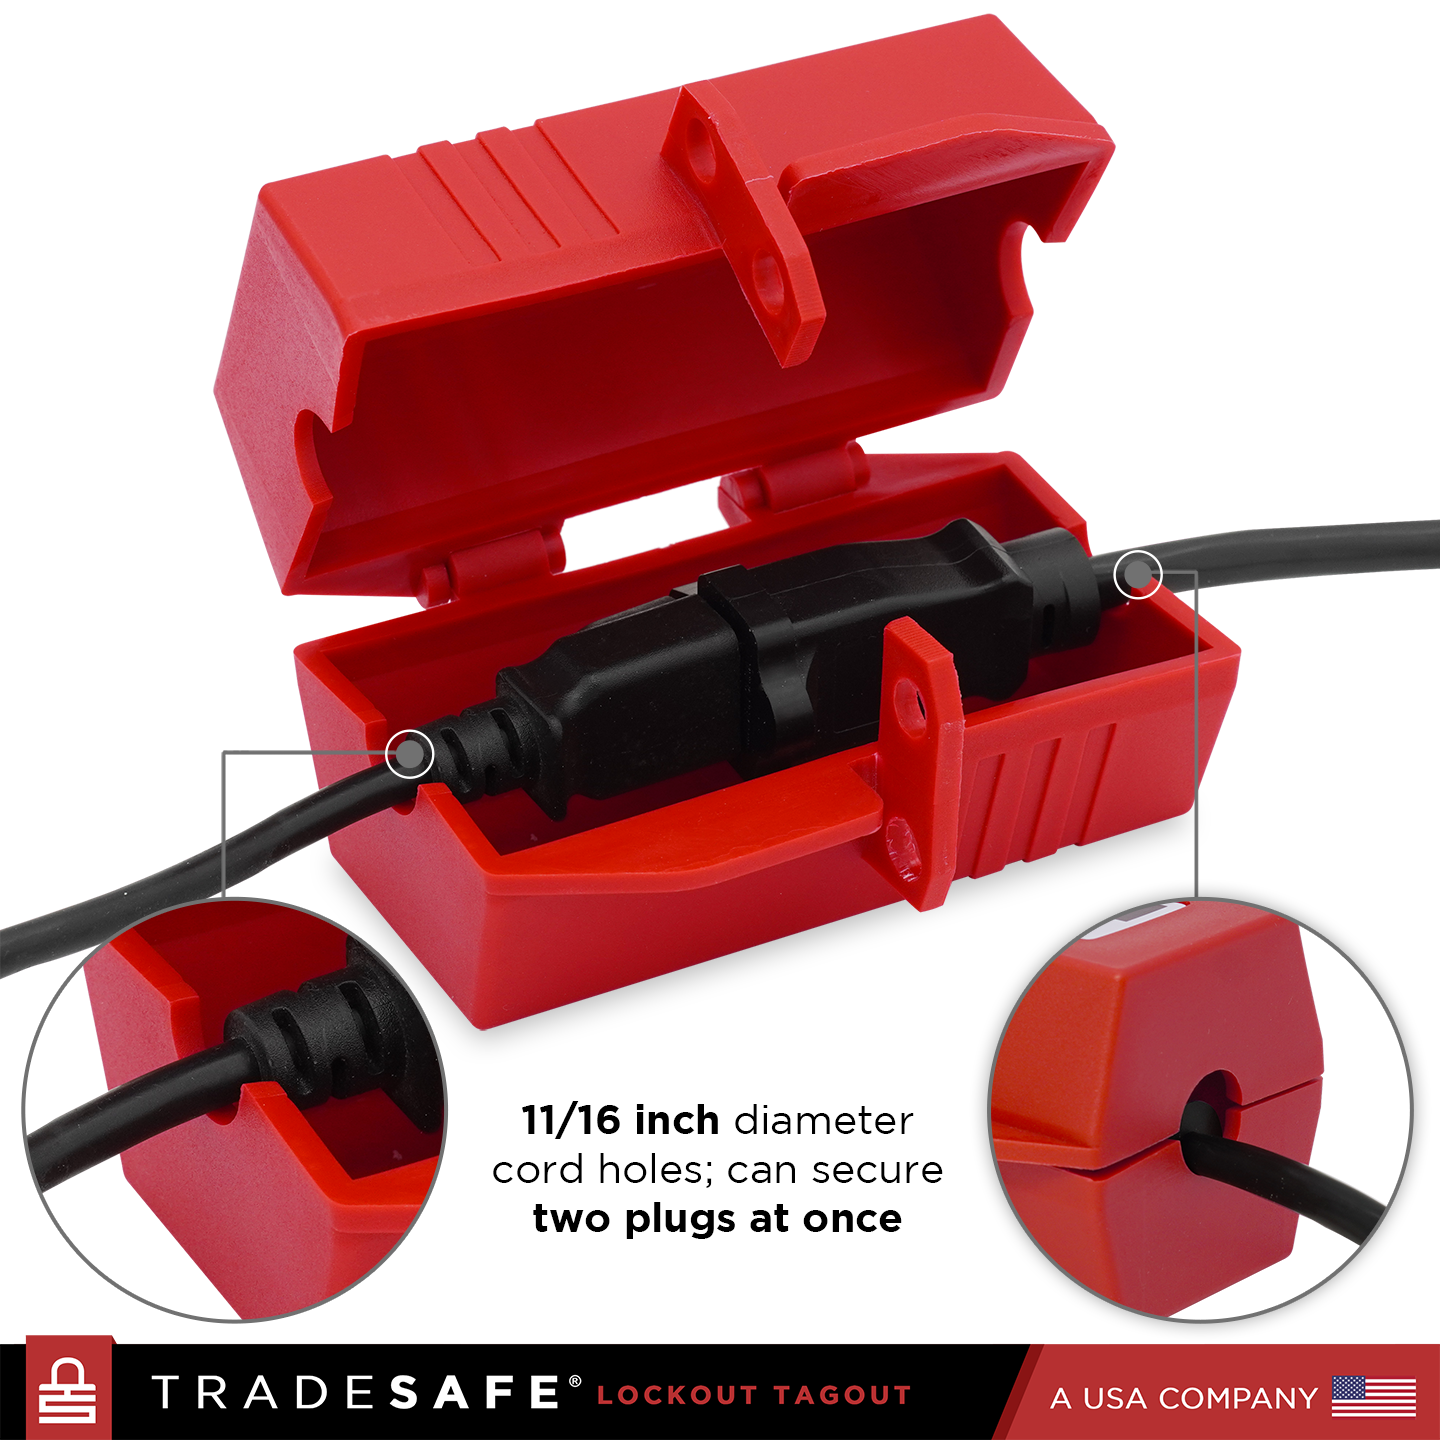 infographic: 11/16 inch diameter cord holes; can secure two plugs at once